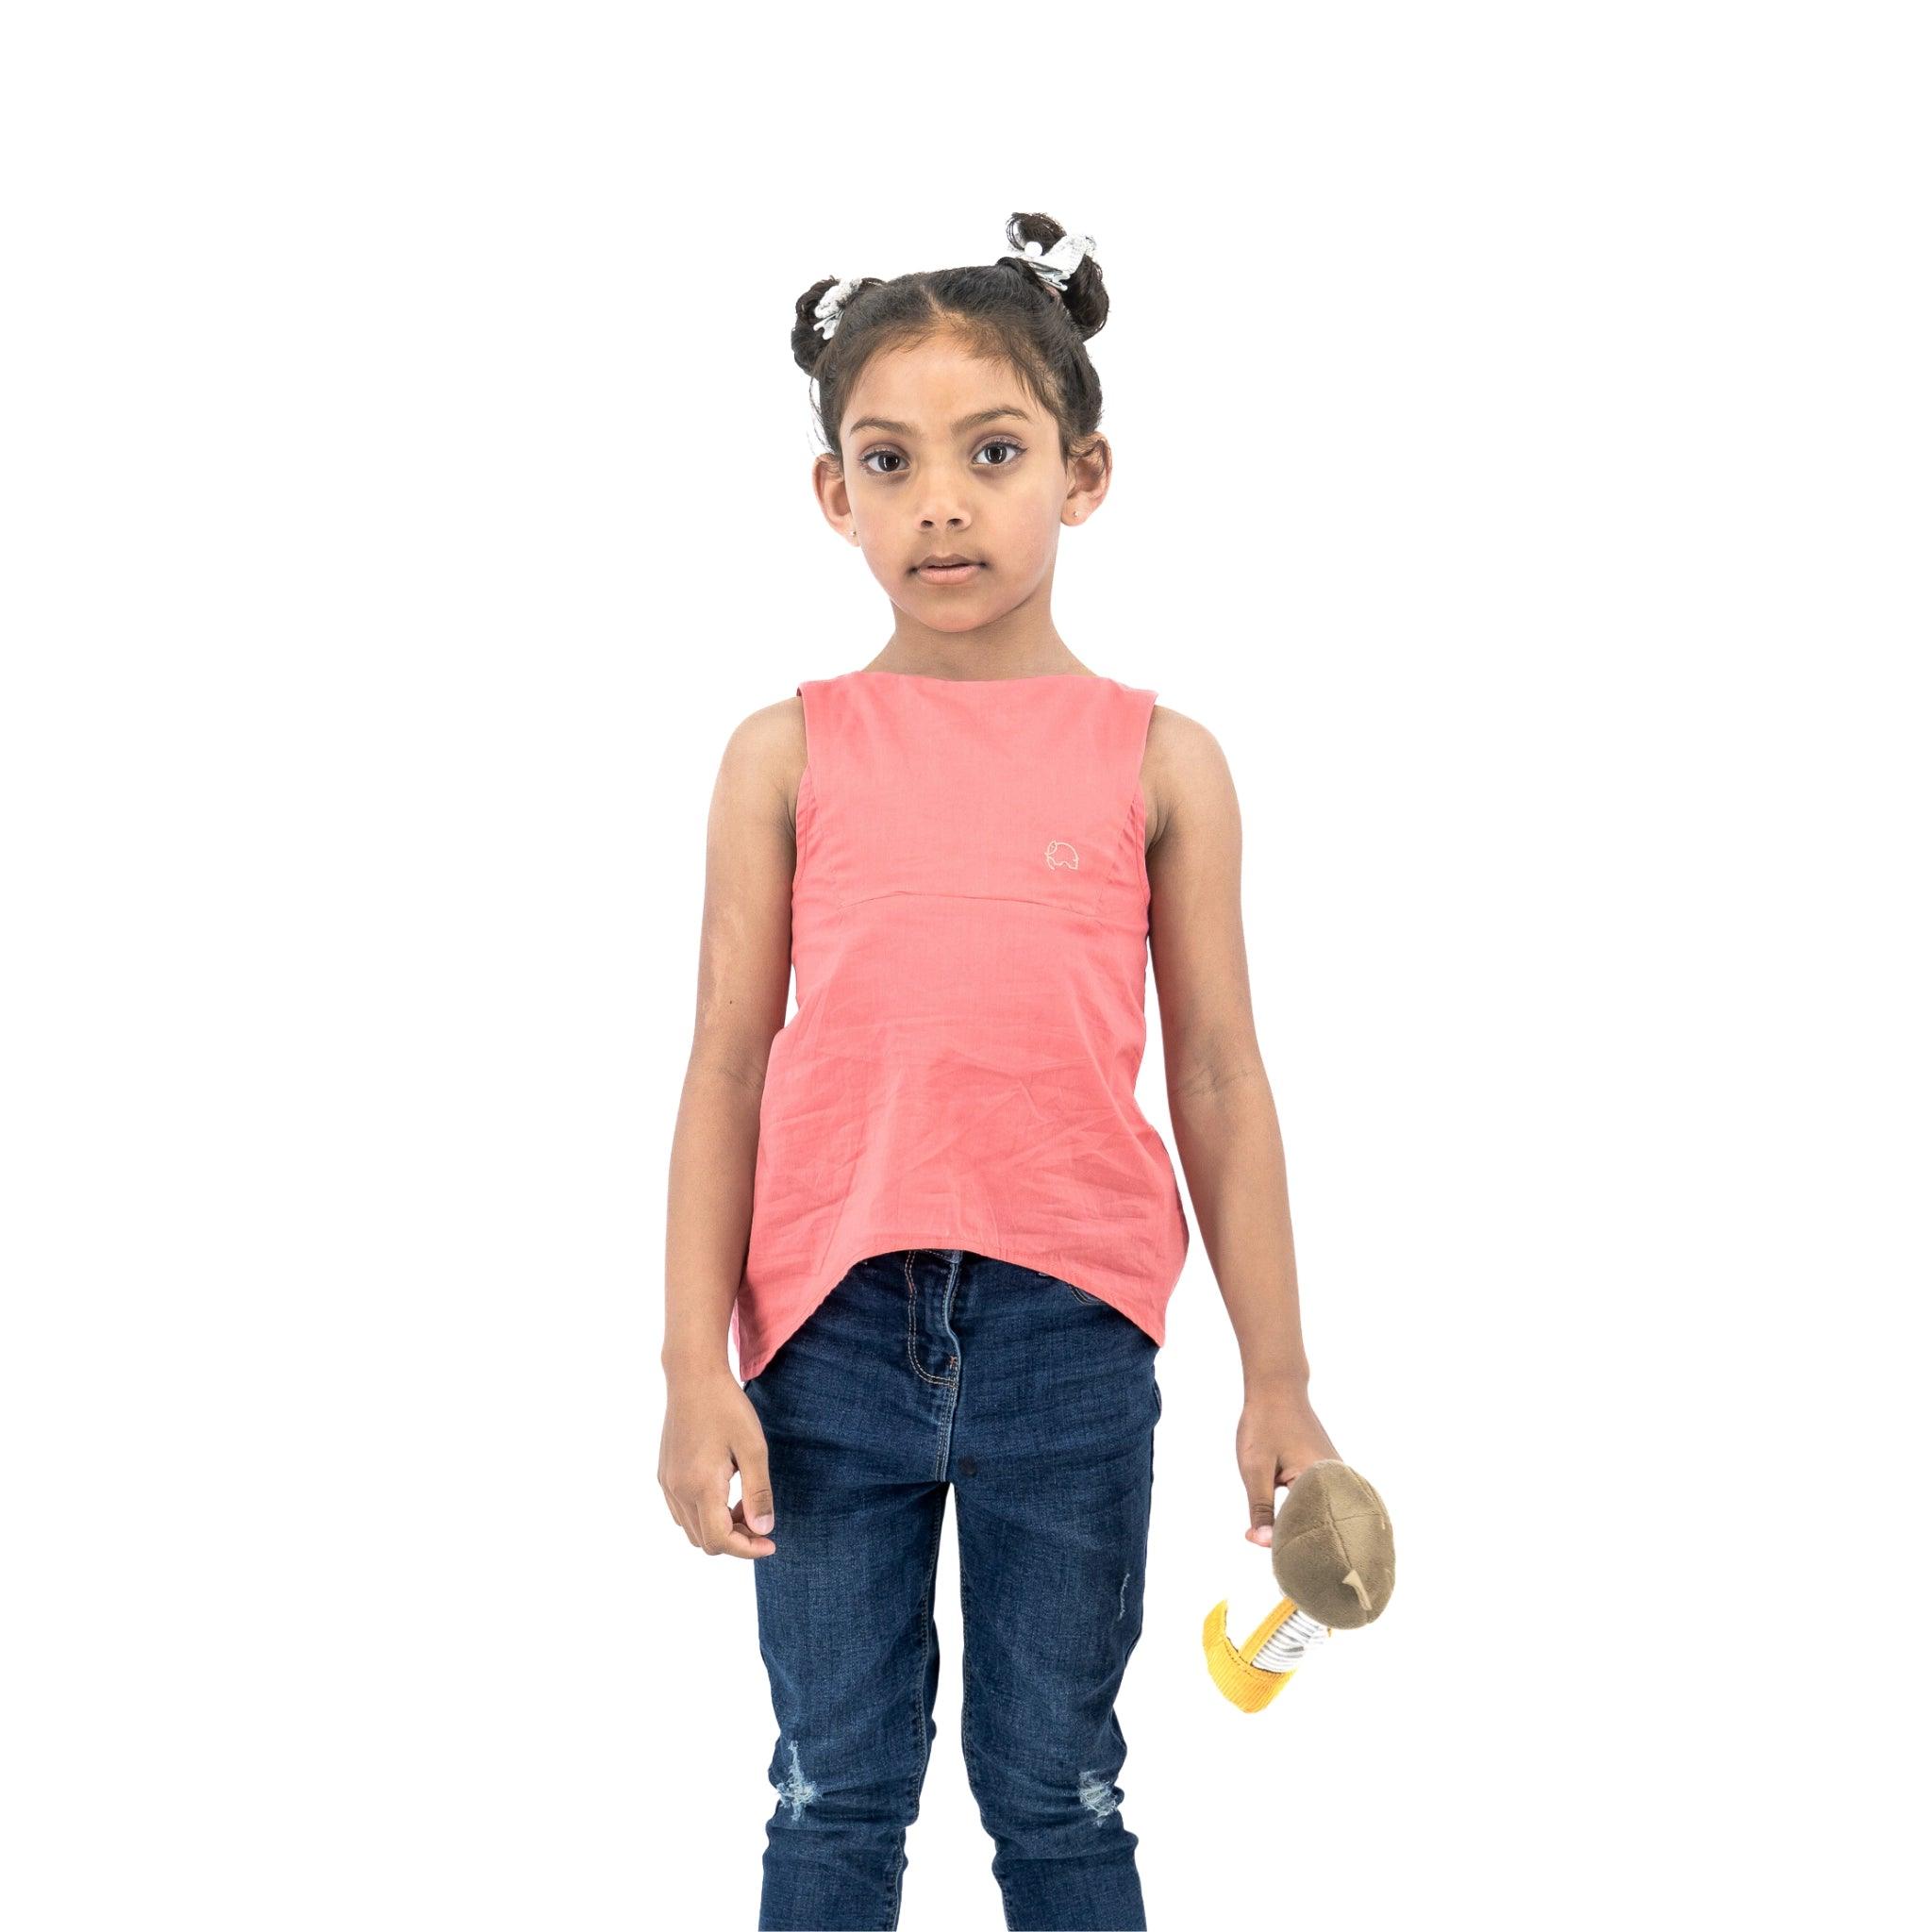 A young girl with buns in her hair, wearing a Karee Tea Rose Cotton Bib Neck Top for kids and jeans, holding a paintbrush, standing against a white background.